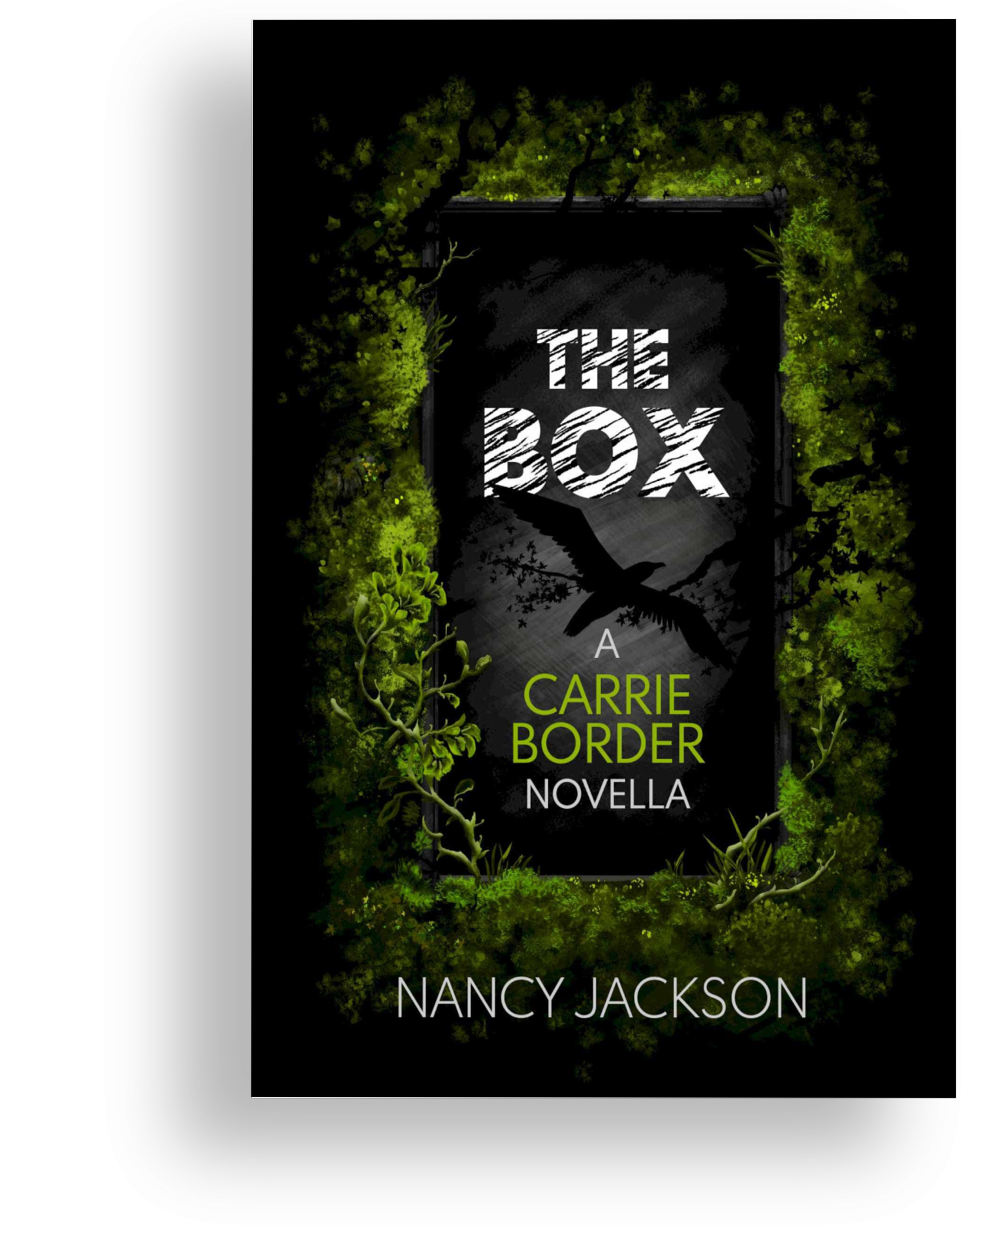 The Box - a Carrie Border novella - Author Signed Soft Cover